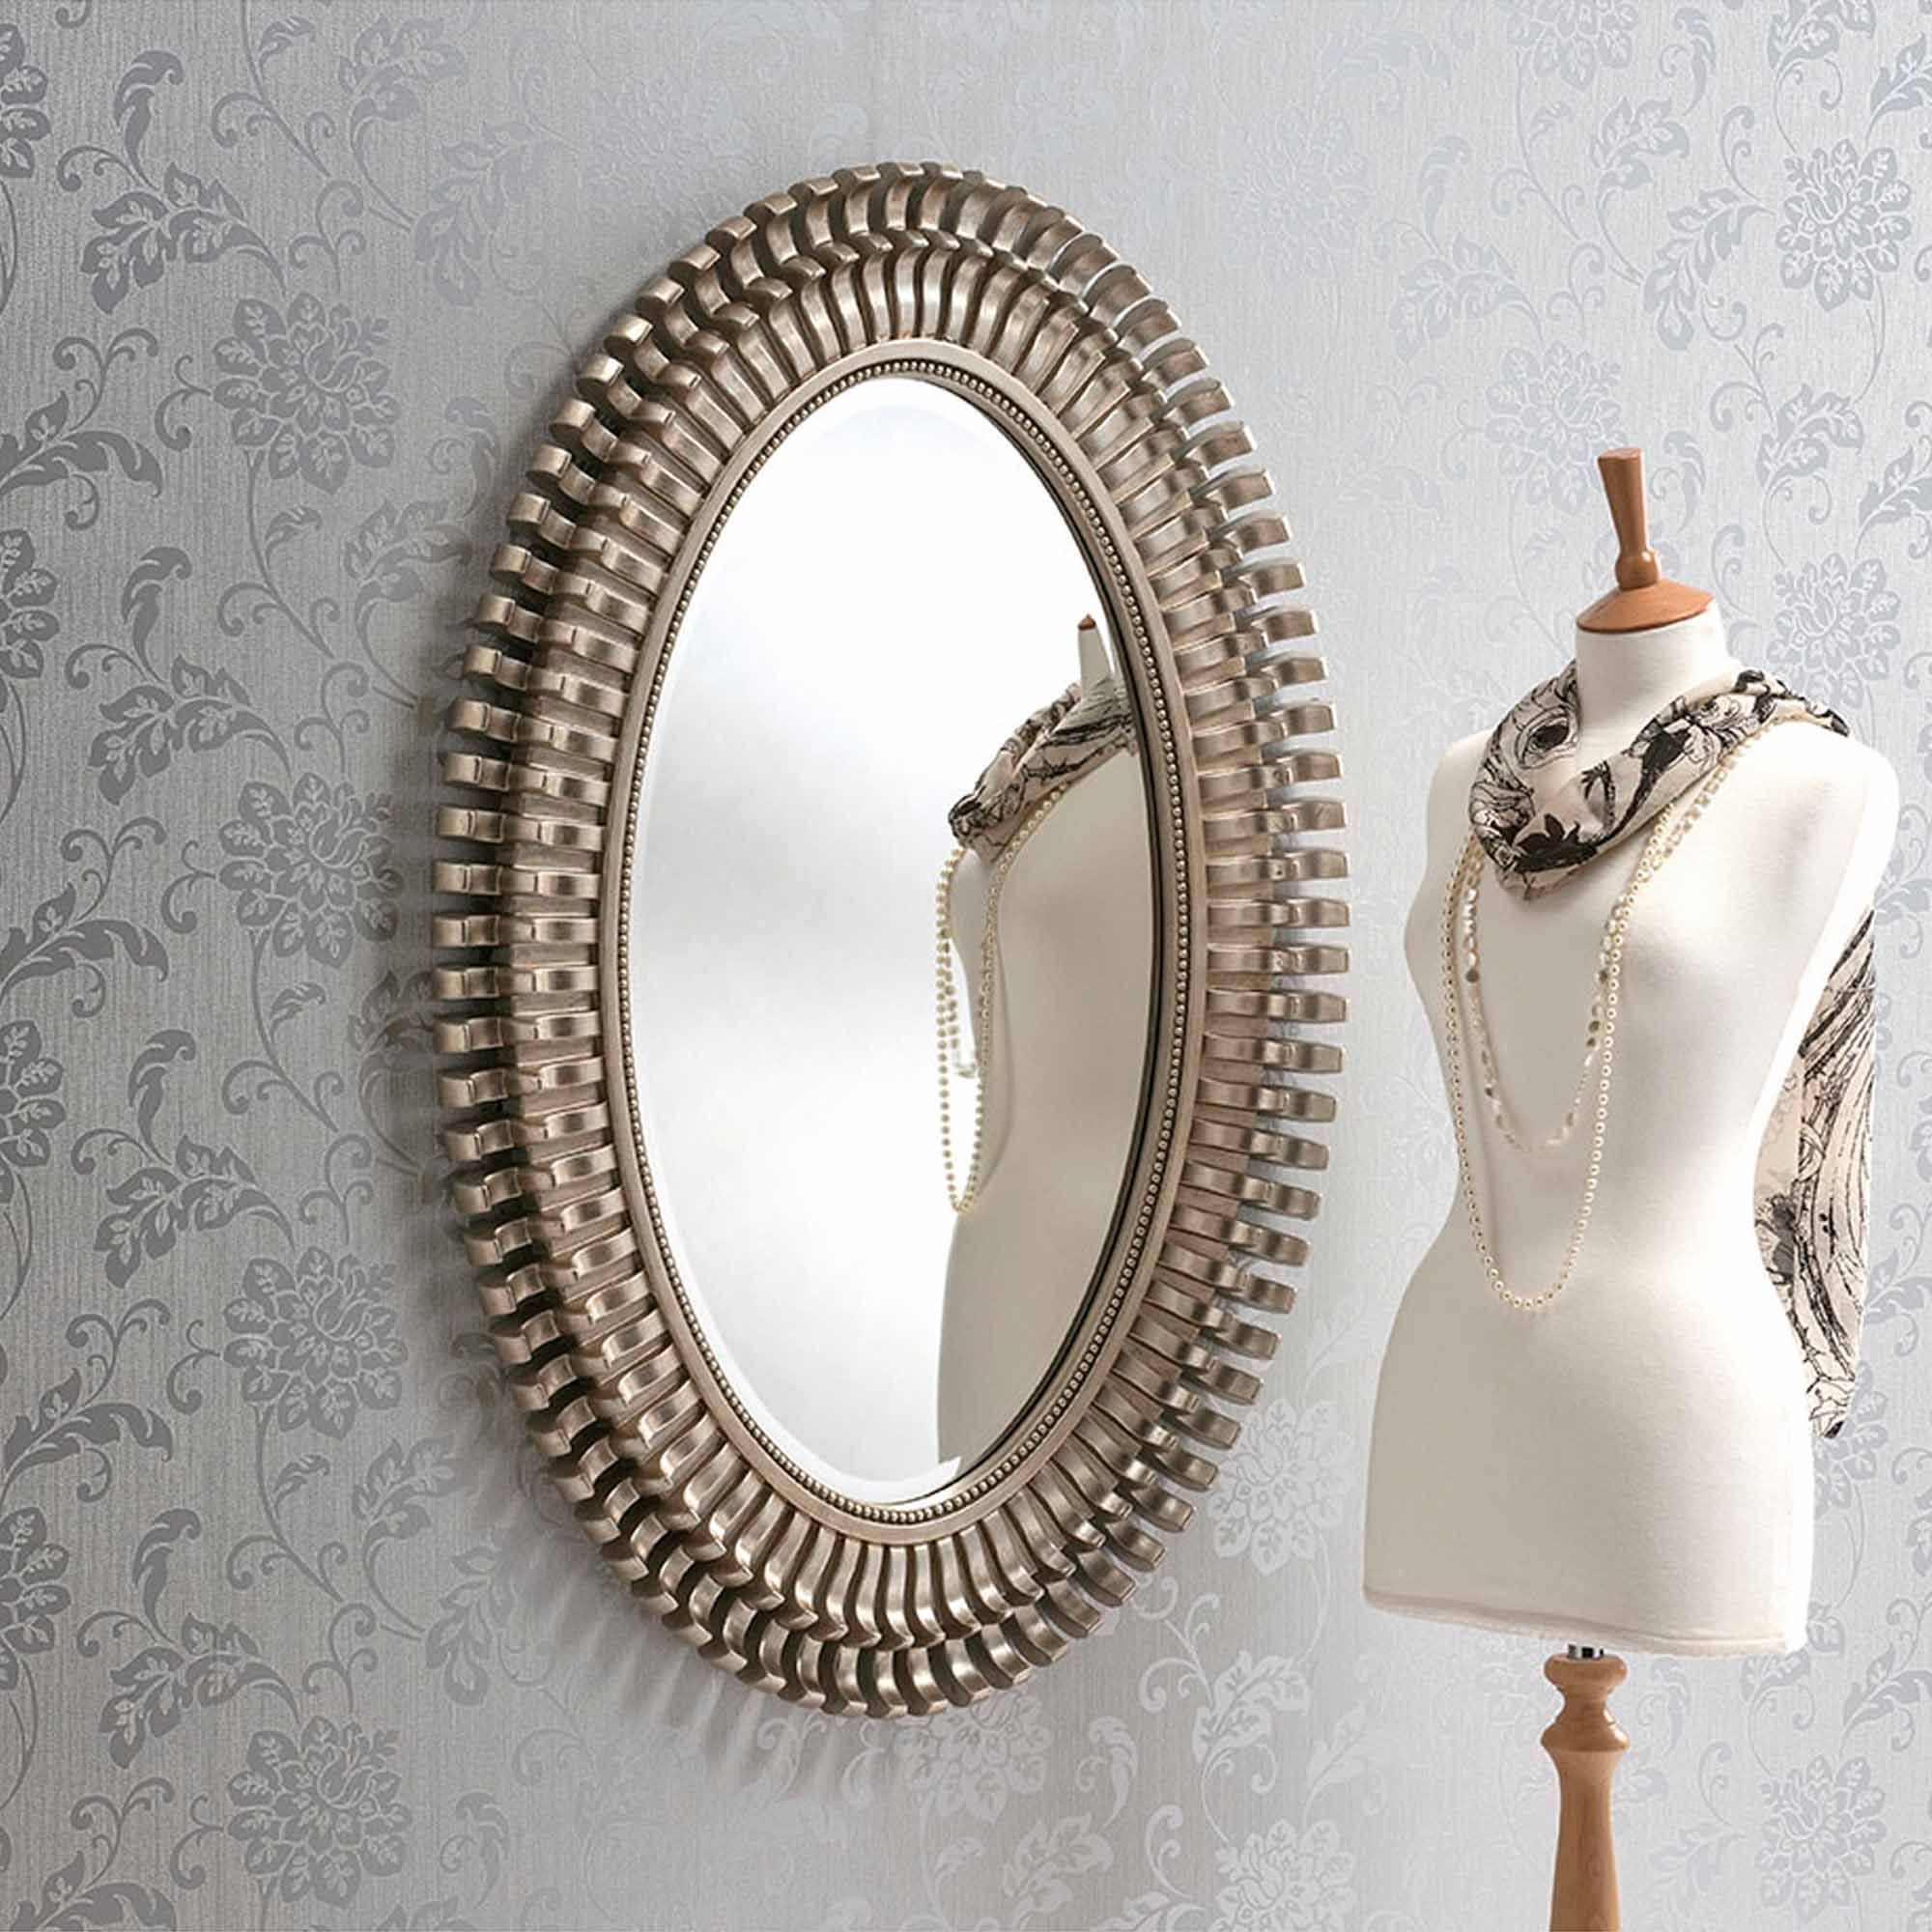 Silver Decorative Mirror Pertaining To Silver Decorative Wall Mirrors (View 11 of 15)